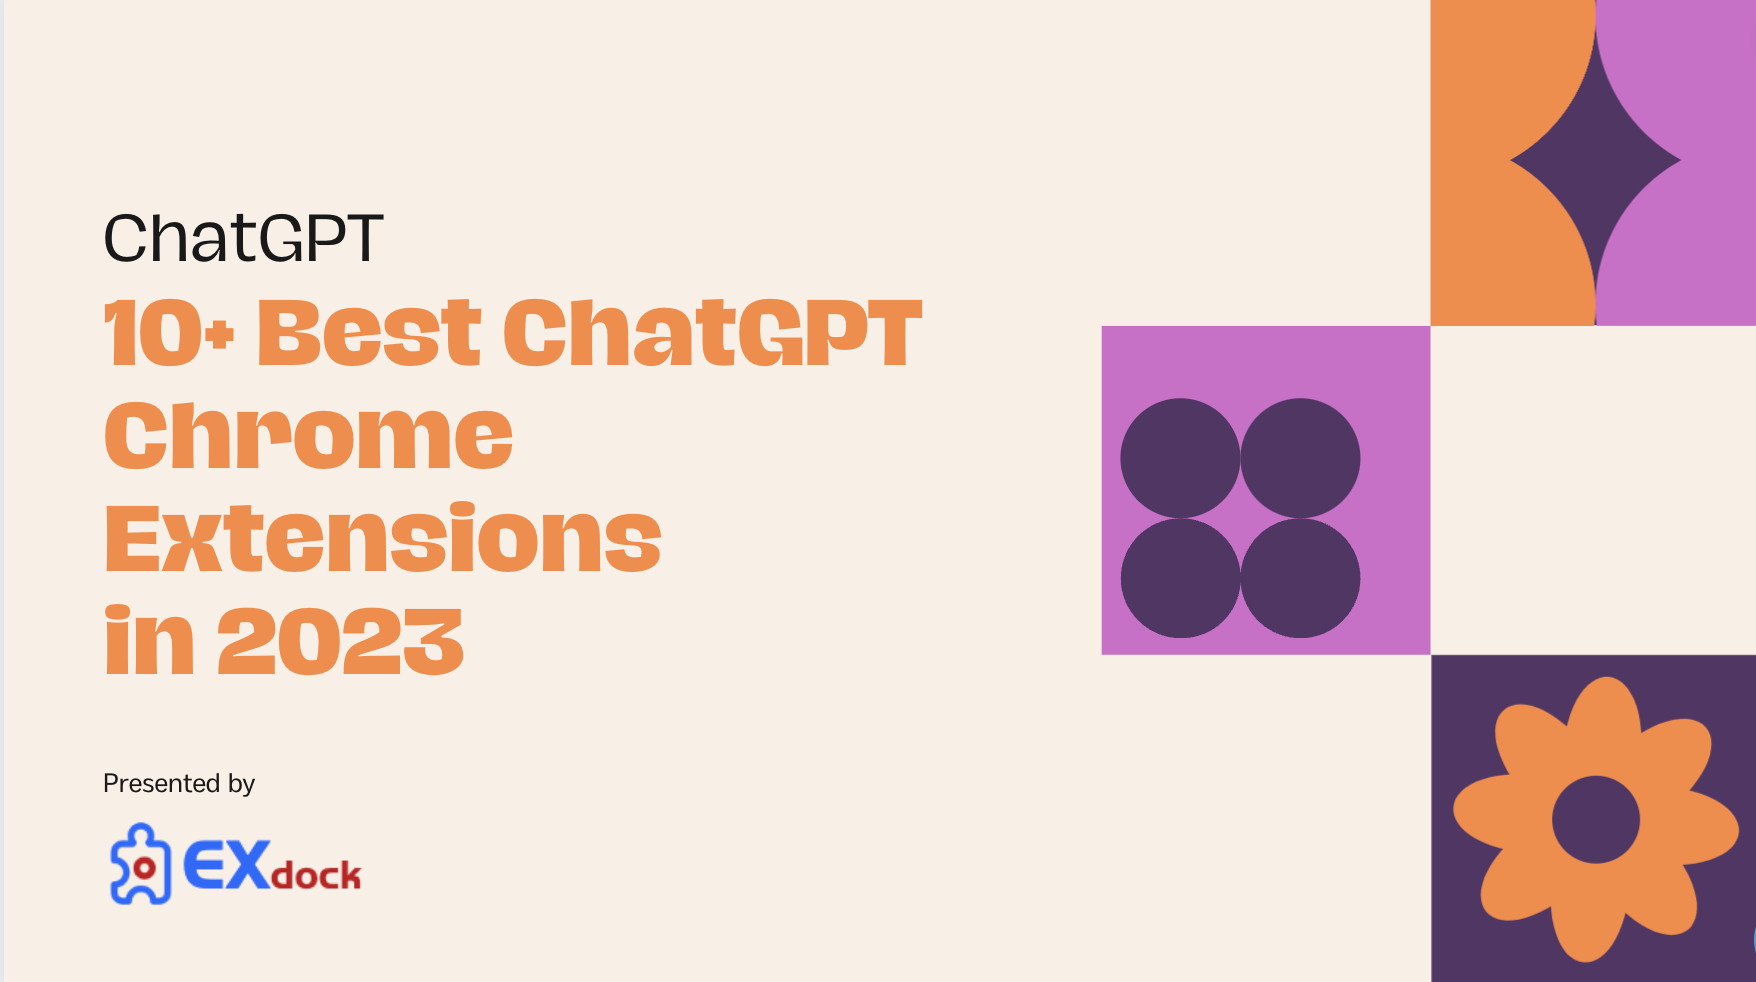 10+ Best ChatGPT Chrome Extensions in 2023